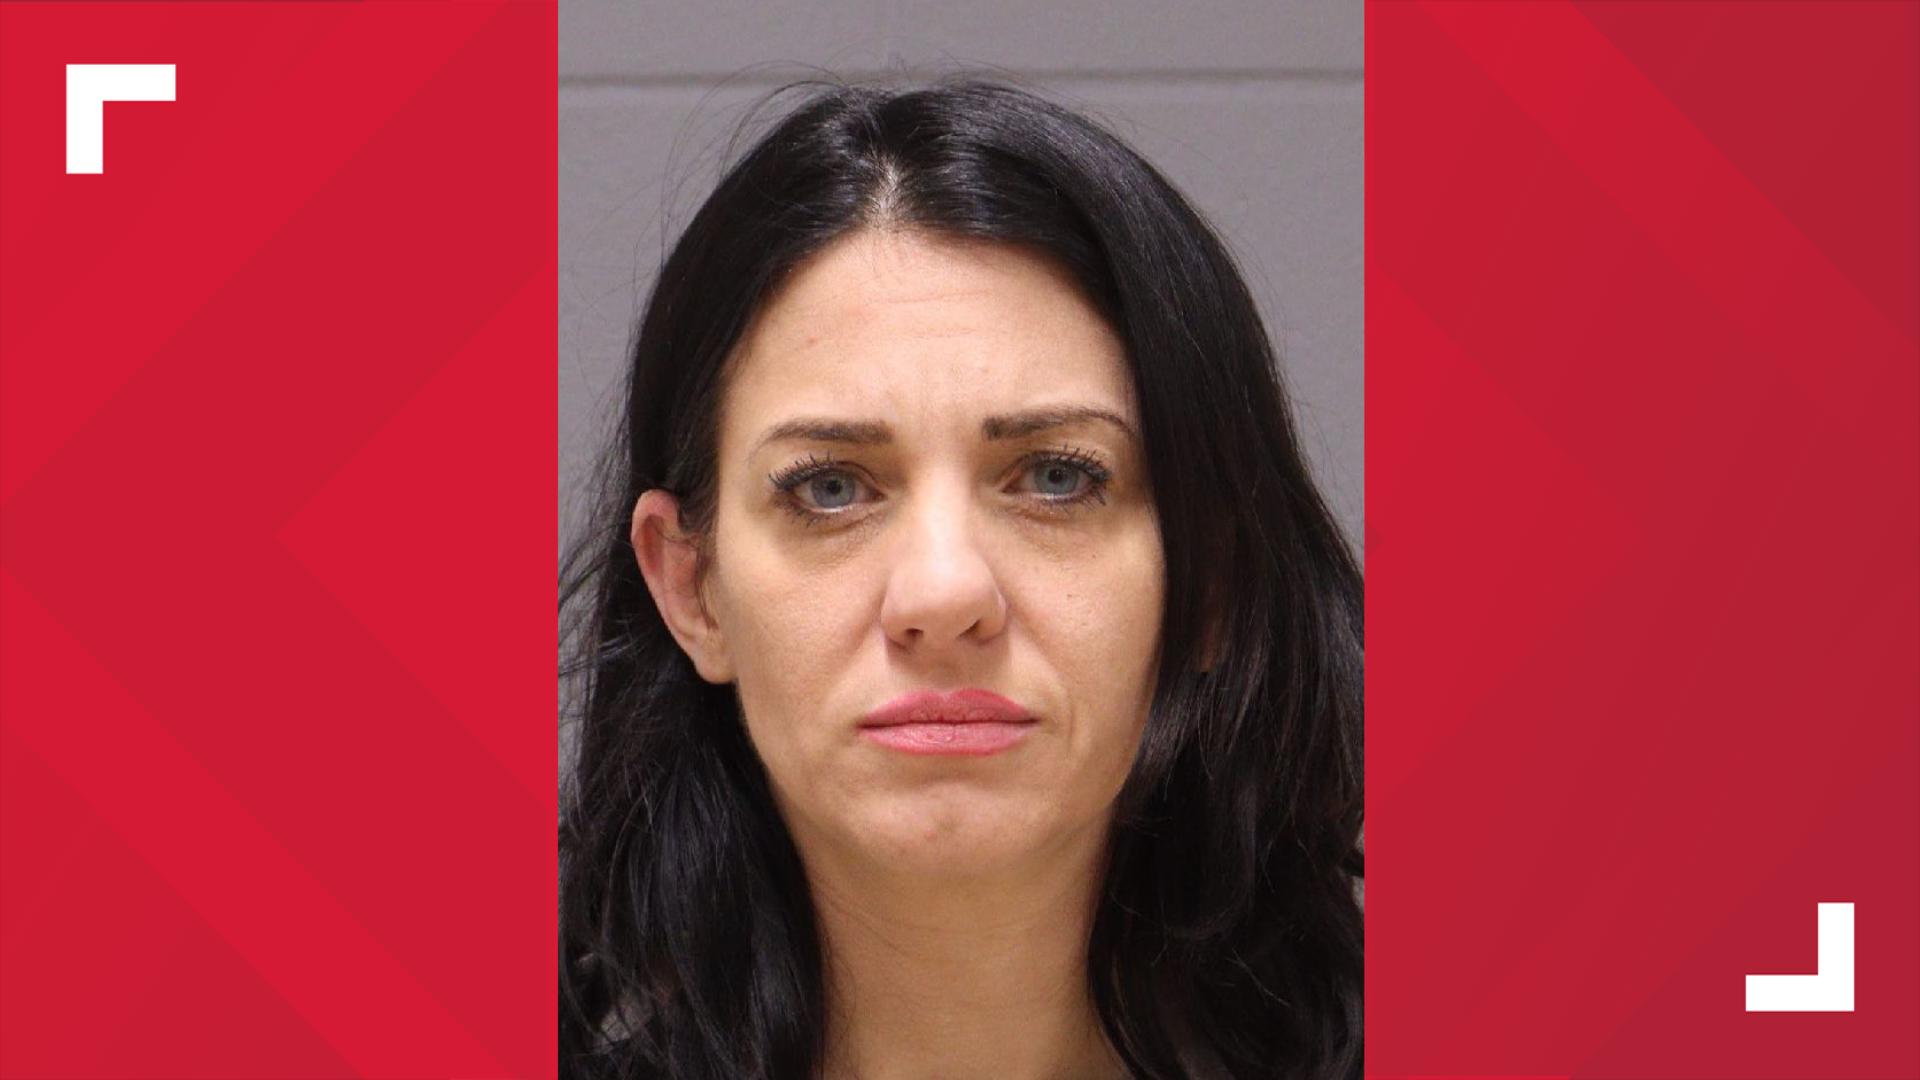 The woman accused of running an illicit massage parlor in Kent County was arraigned Monday.